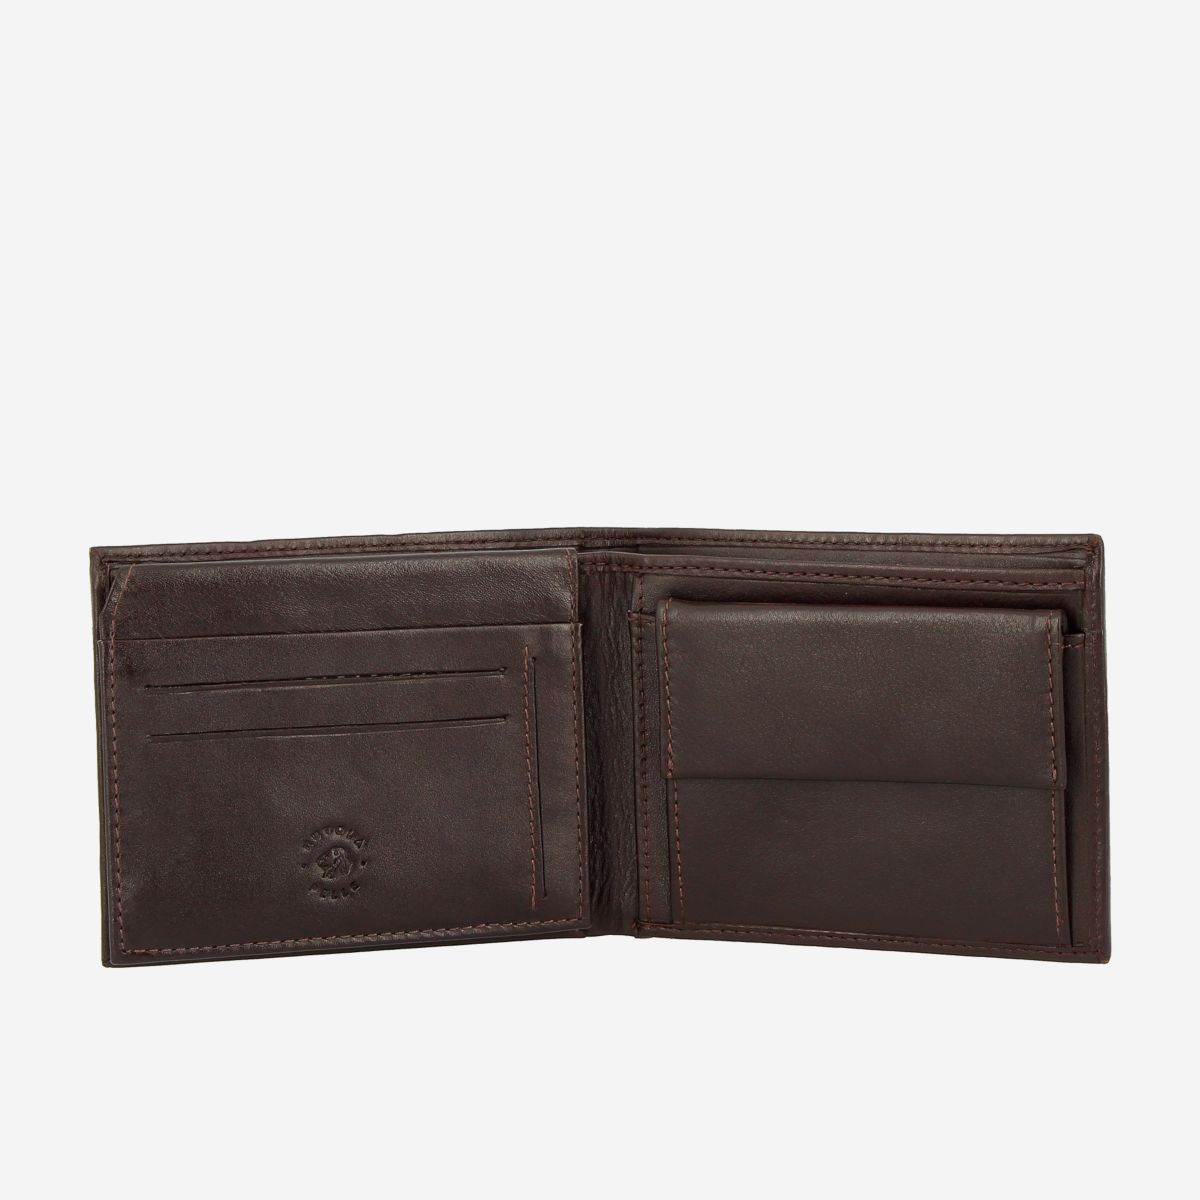 Elegant Mens Leather Wallet With Coin Coin Purse - Dark Brown